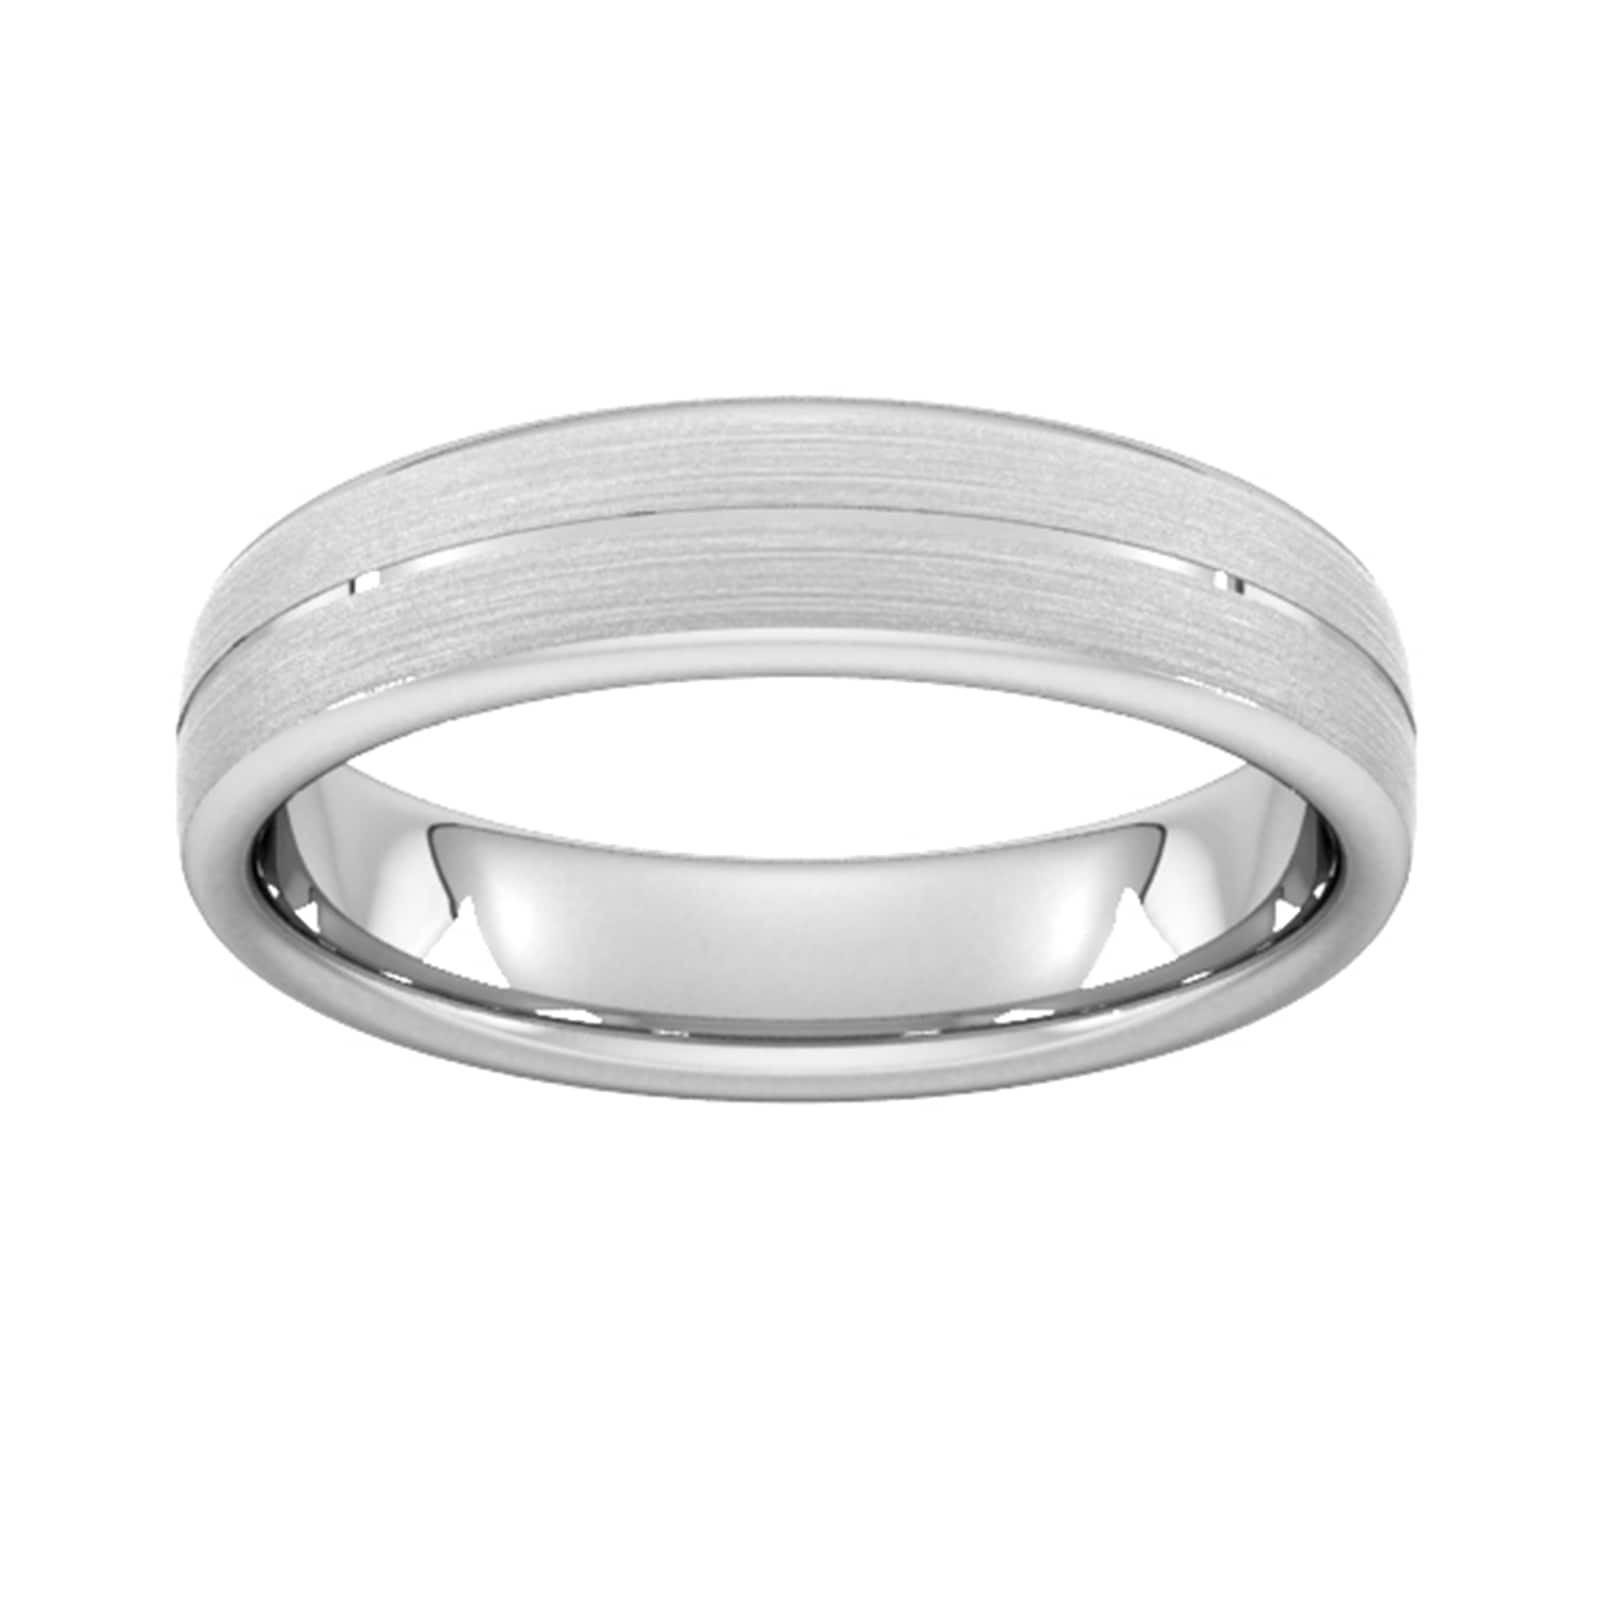 5mm D Shape Standard Centre Groove With Chamfered Edge Wedding Ring In 18 Carat White Gold - Ring Size Q